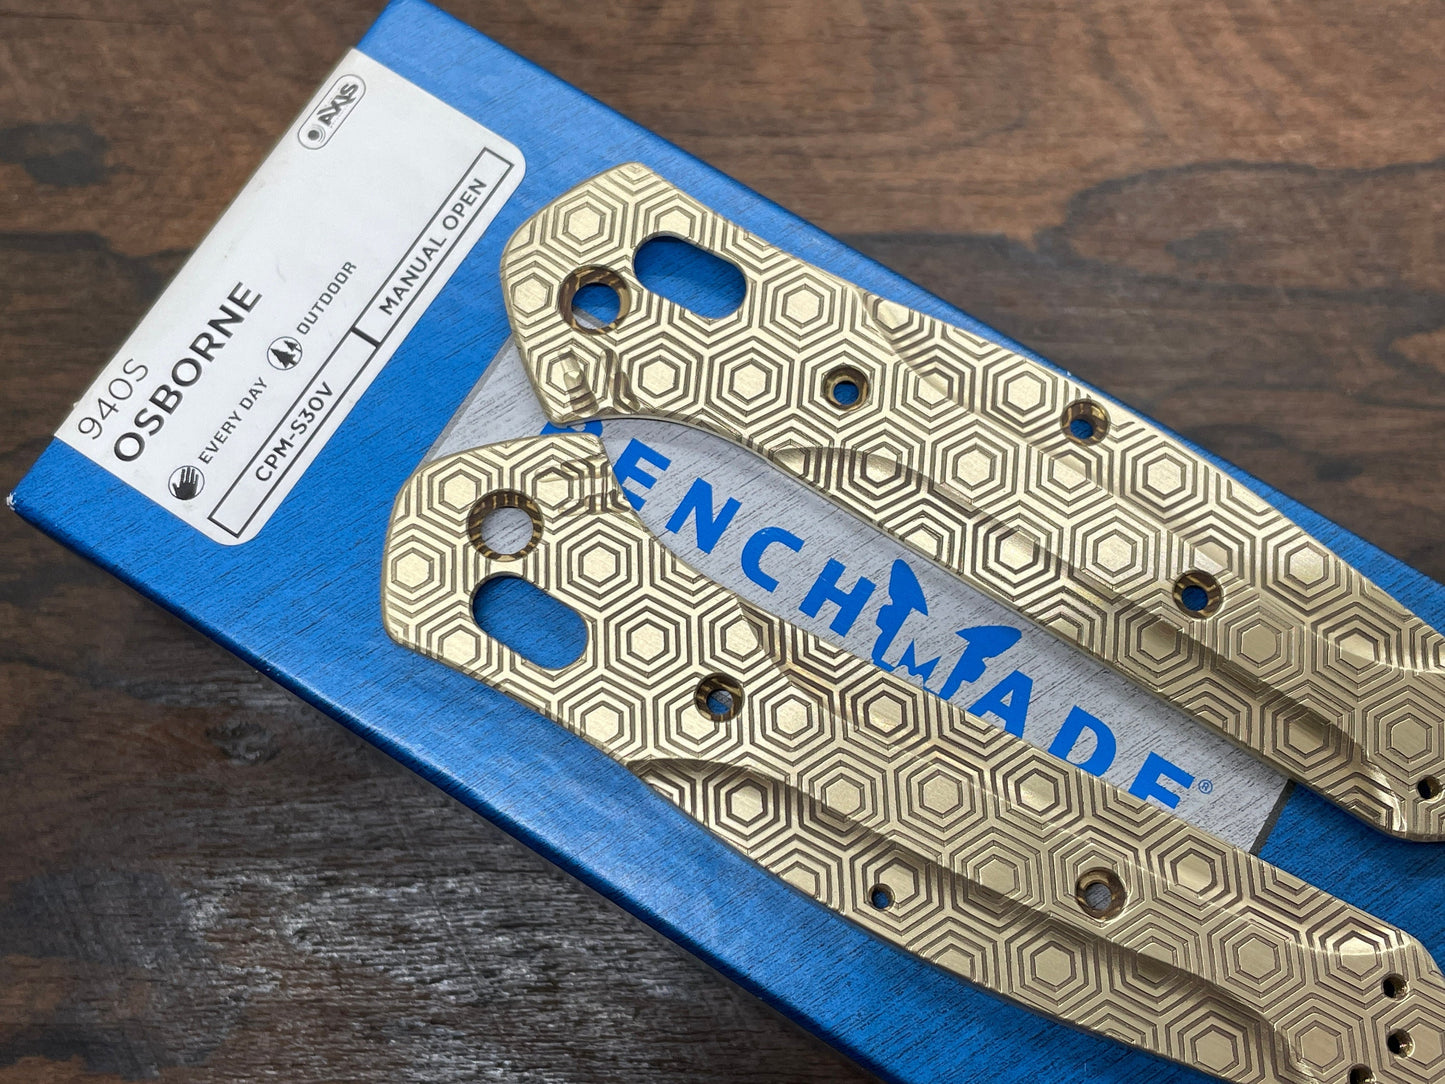 HONEYCOMB engraved Brass Scales for Benchmade 940 Osborne